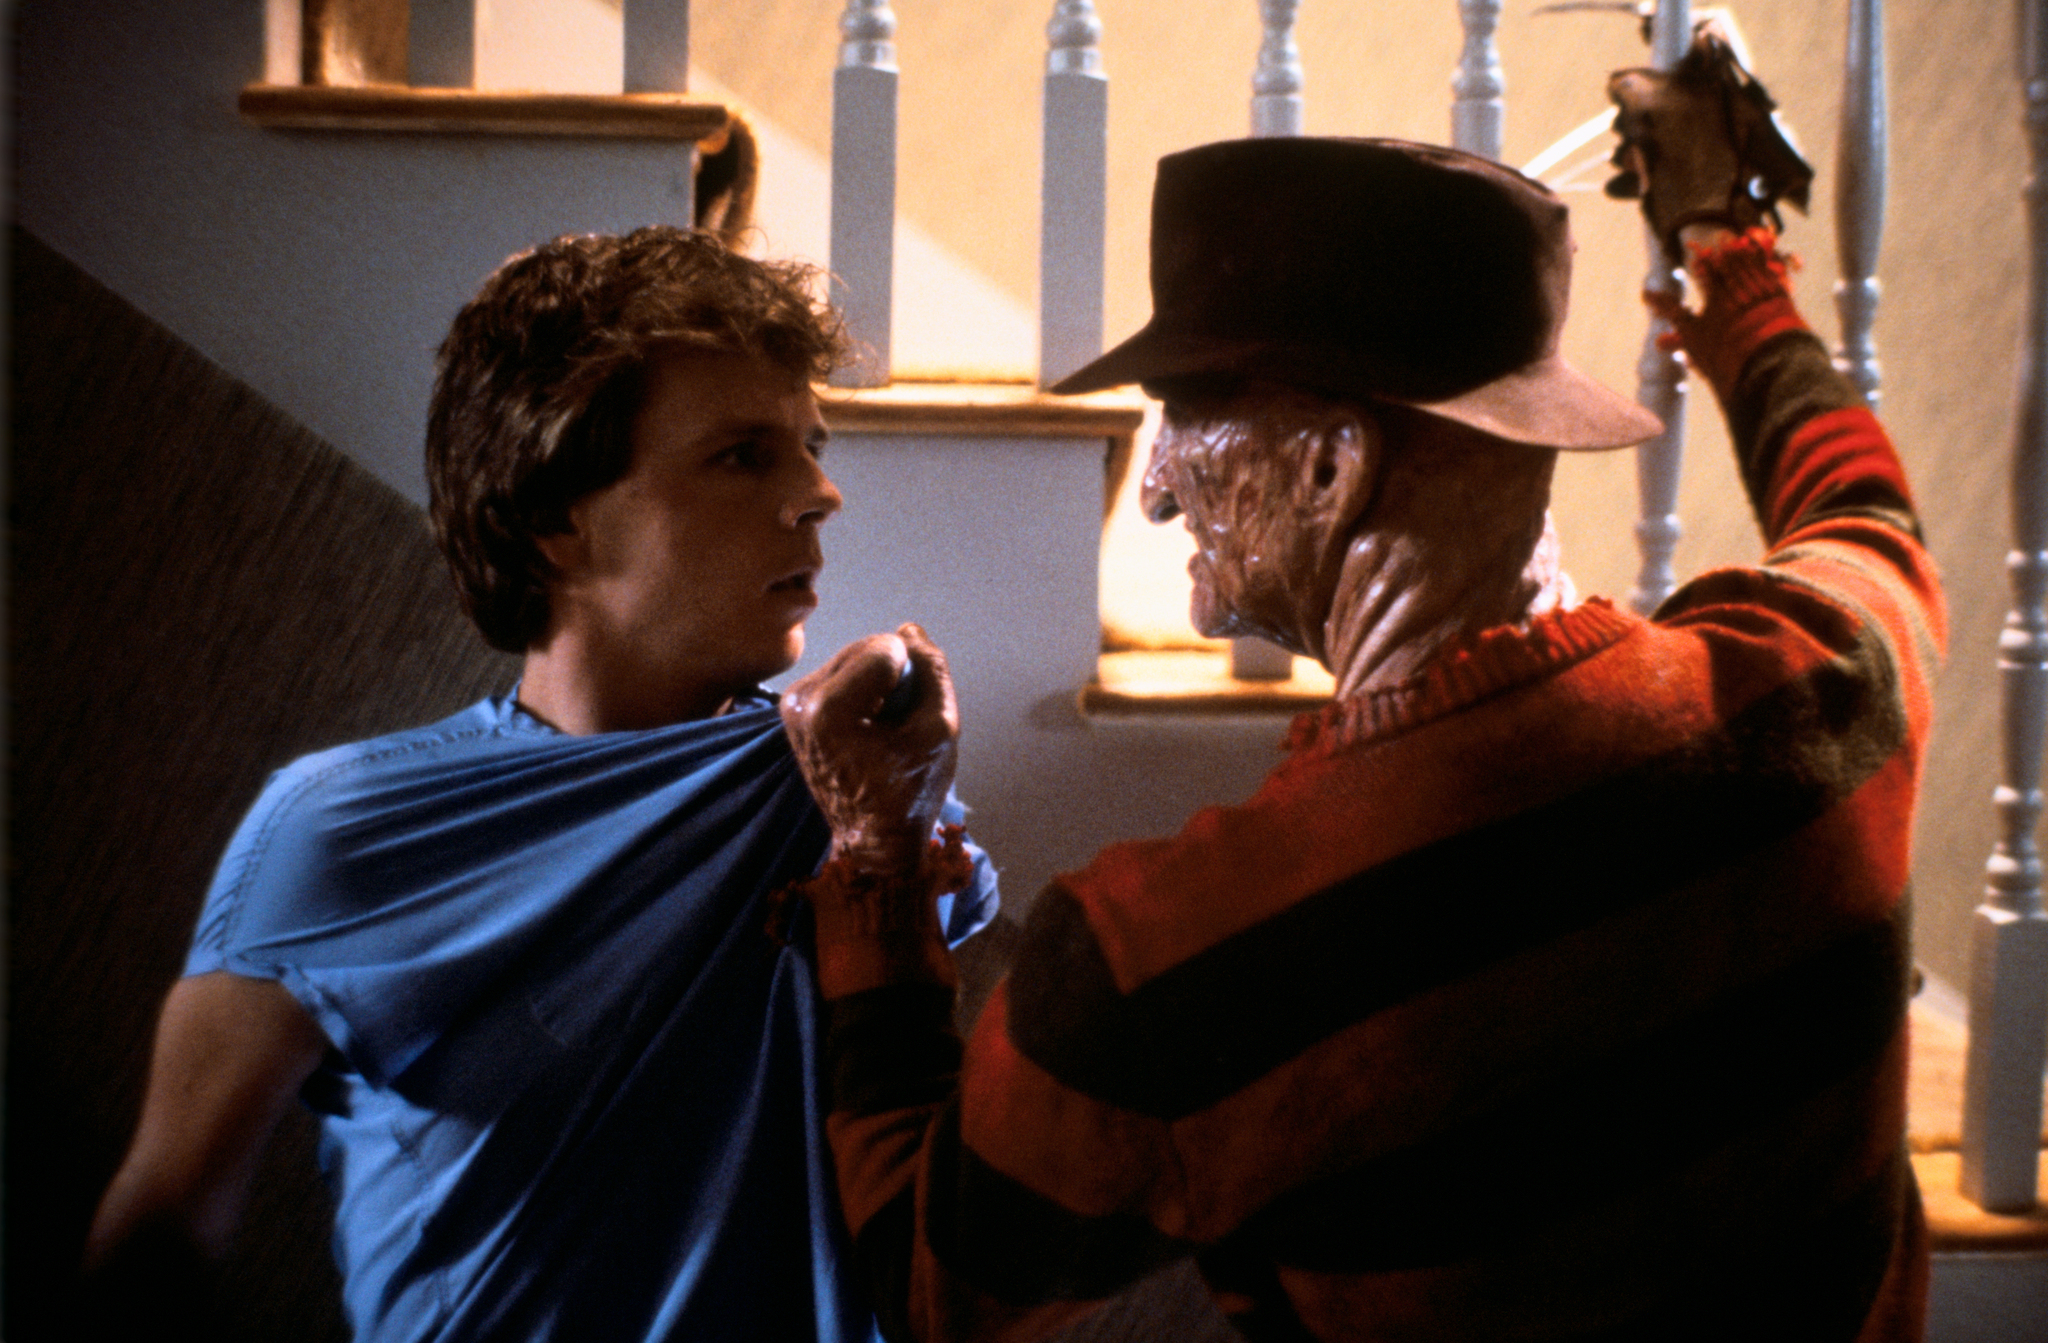 Still of Robert Englund and Mark Patton in A Nightmare on Elm Street Part 2: Freddy's Revenge (1985)